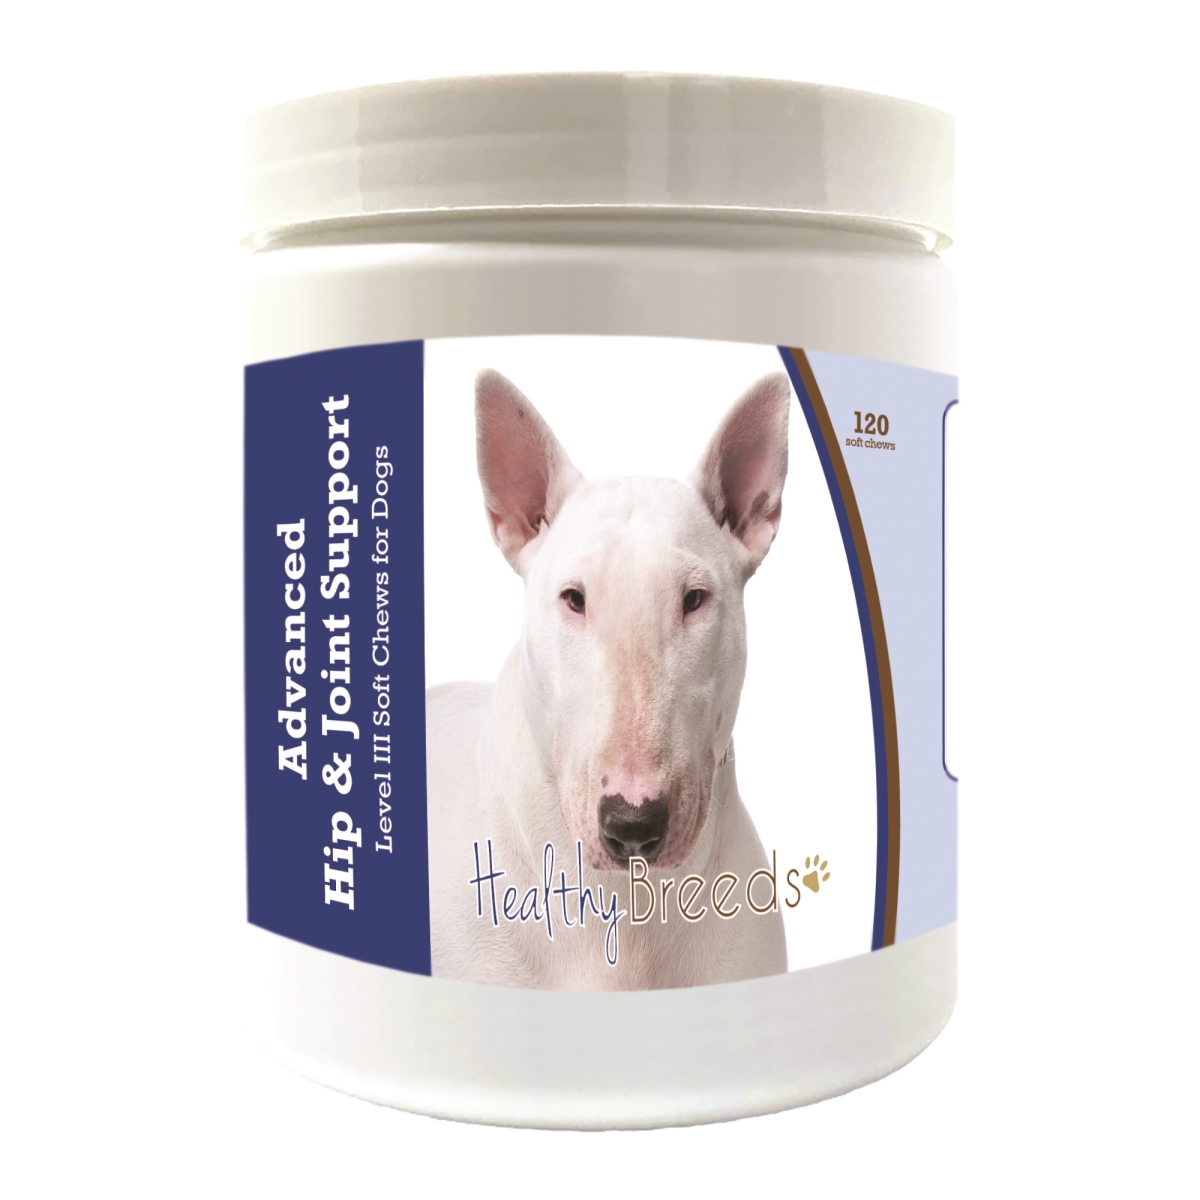 Picture of Healthy Breeds 192959897814 Bull Terrier Advanced Hip & Joint Support Level III Soft Chews for Dogs